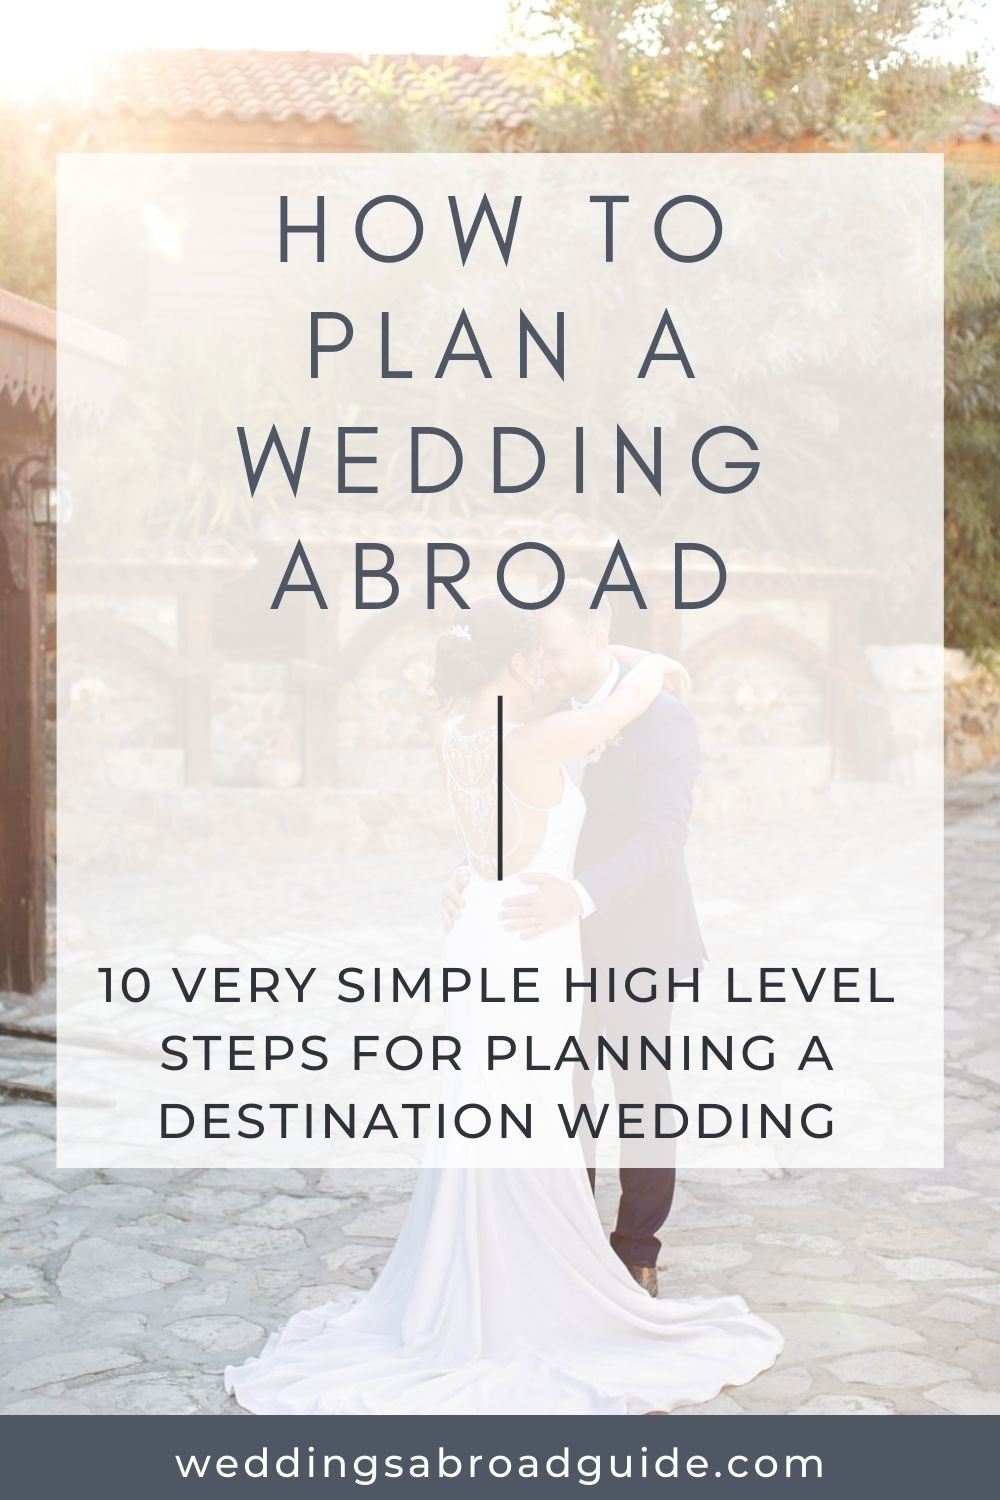 How to Plan a Wedding Abroad - 10 Simply High Level Steps to Planning a Successful Destination Wedding